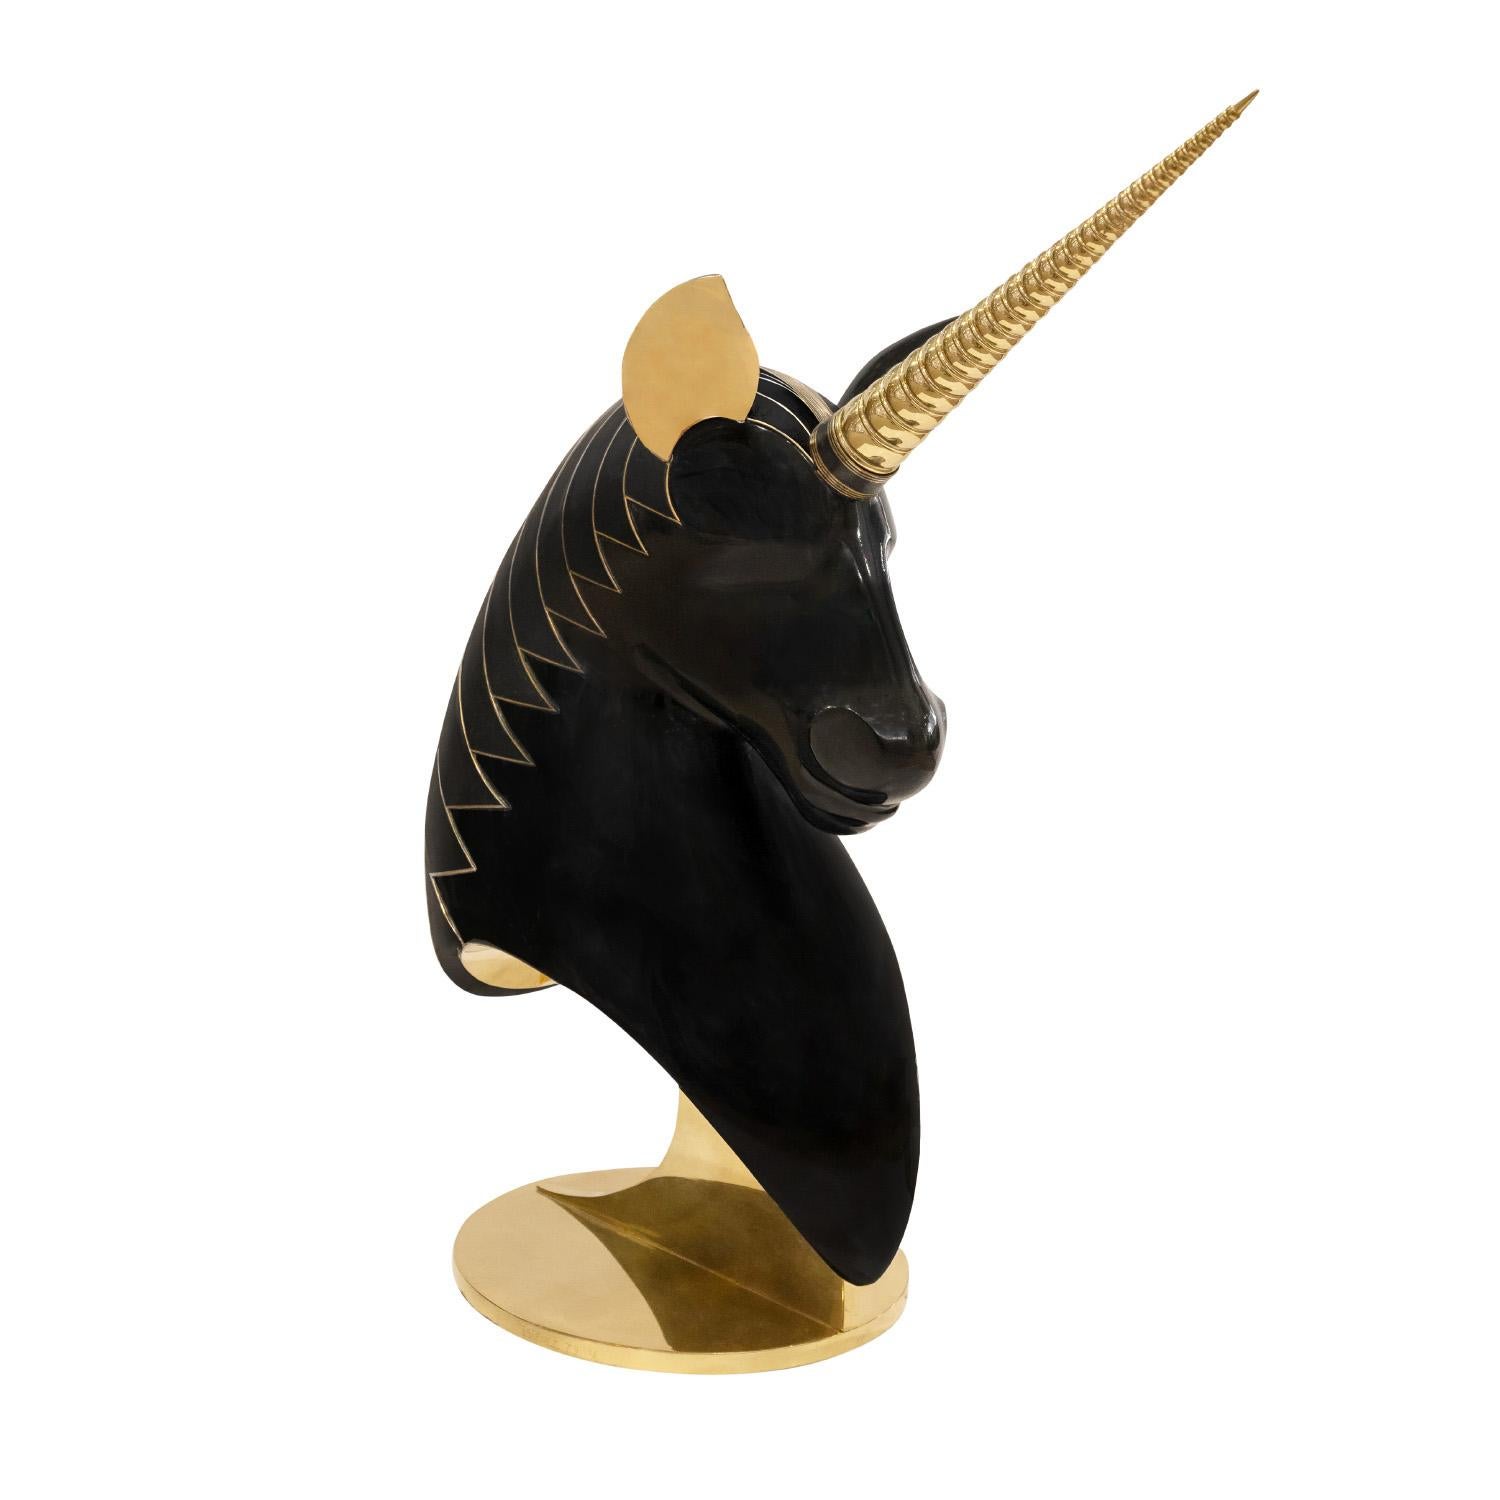 Exquisite large unicorn bust sculpture in cast resin with inlaid bronze mane, solid engraved brass alicorn, and gold leaf ears on a sculptural solid brass base by Roberto Estevez, American 1979 (signed “Estevez 79” and numbered 1/6 on base). This